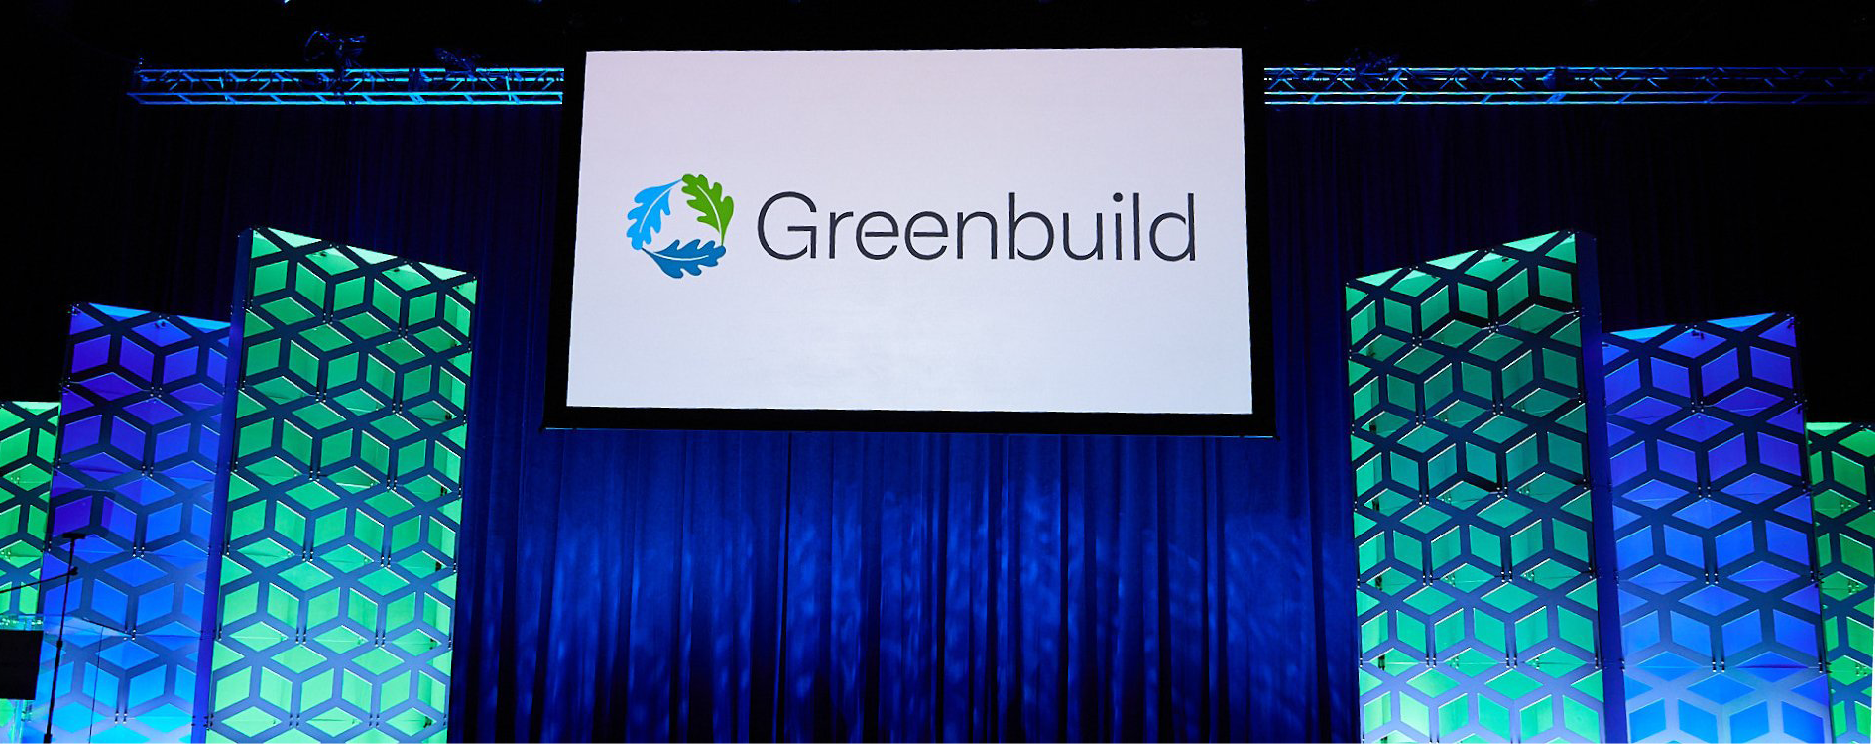 Greenbuild Stage.png